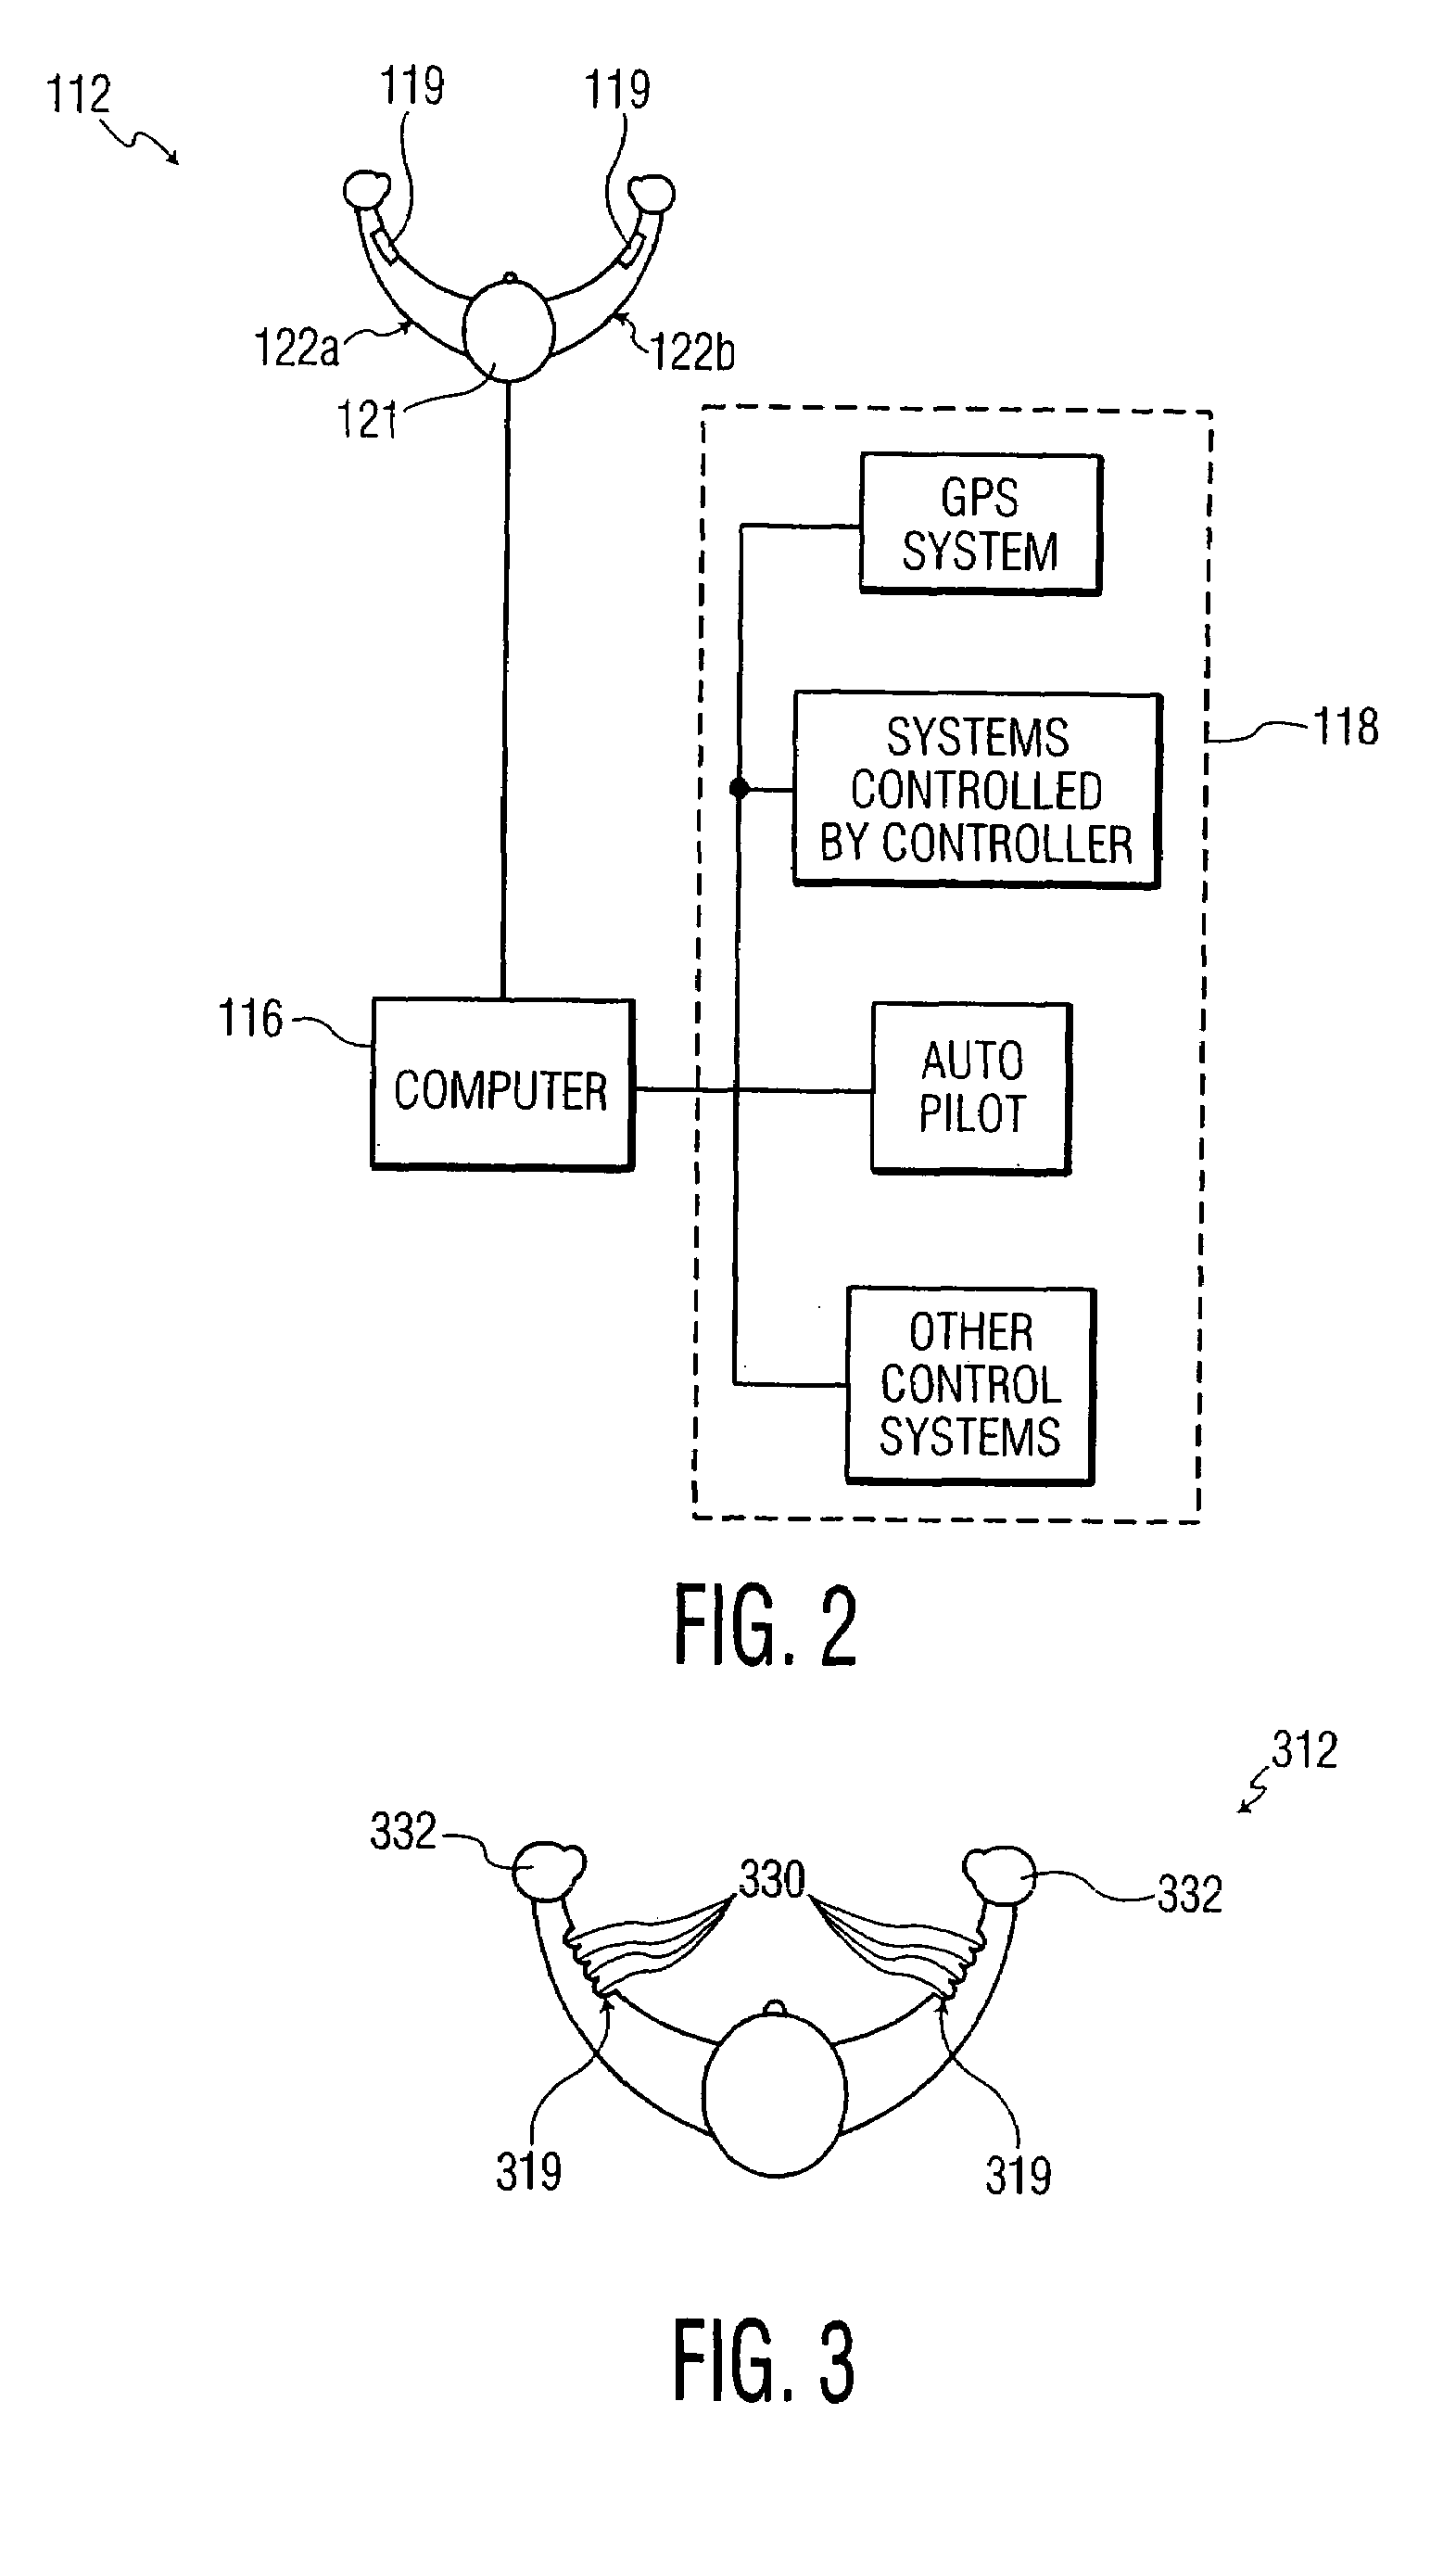 Apparatus, system and method for aircraft security and anti-hijacking intervention